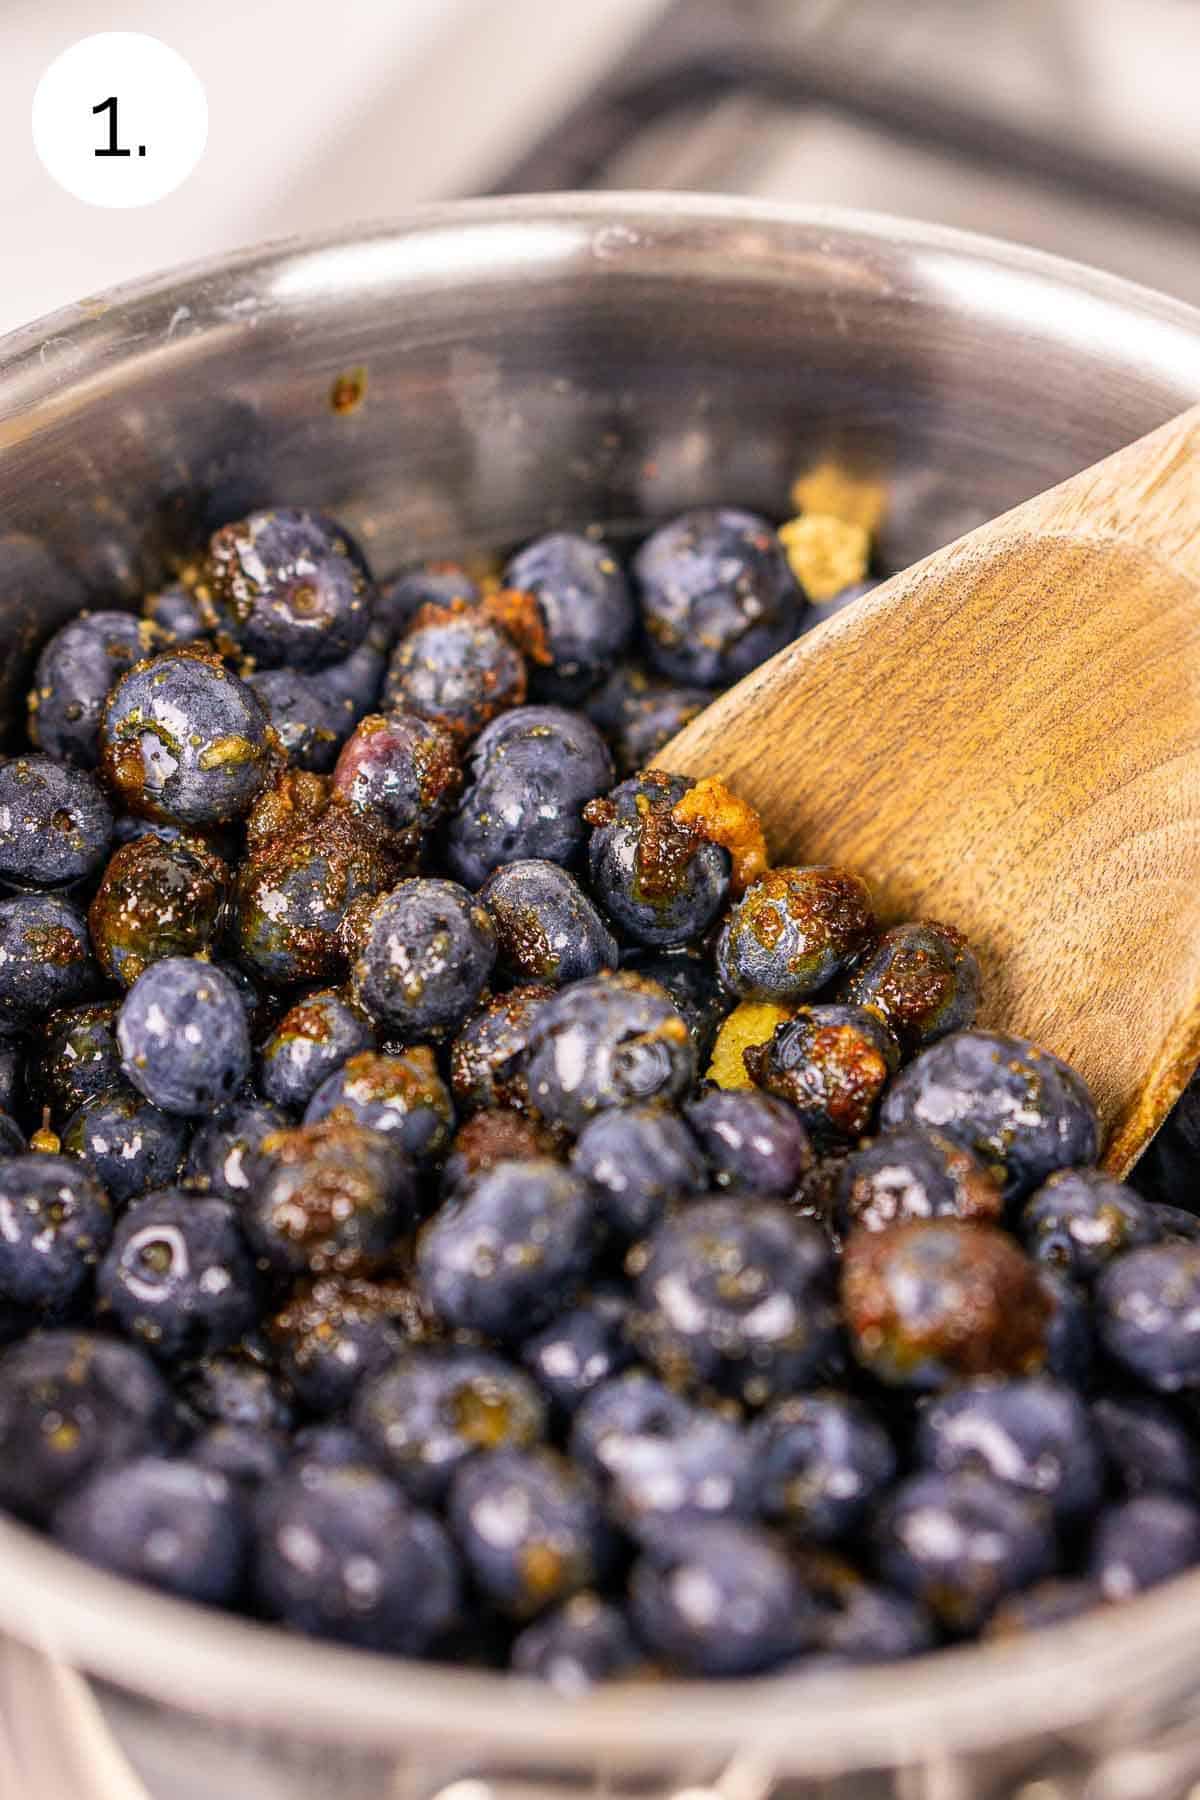 Blueberries and other ingredients in a saucepan